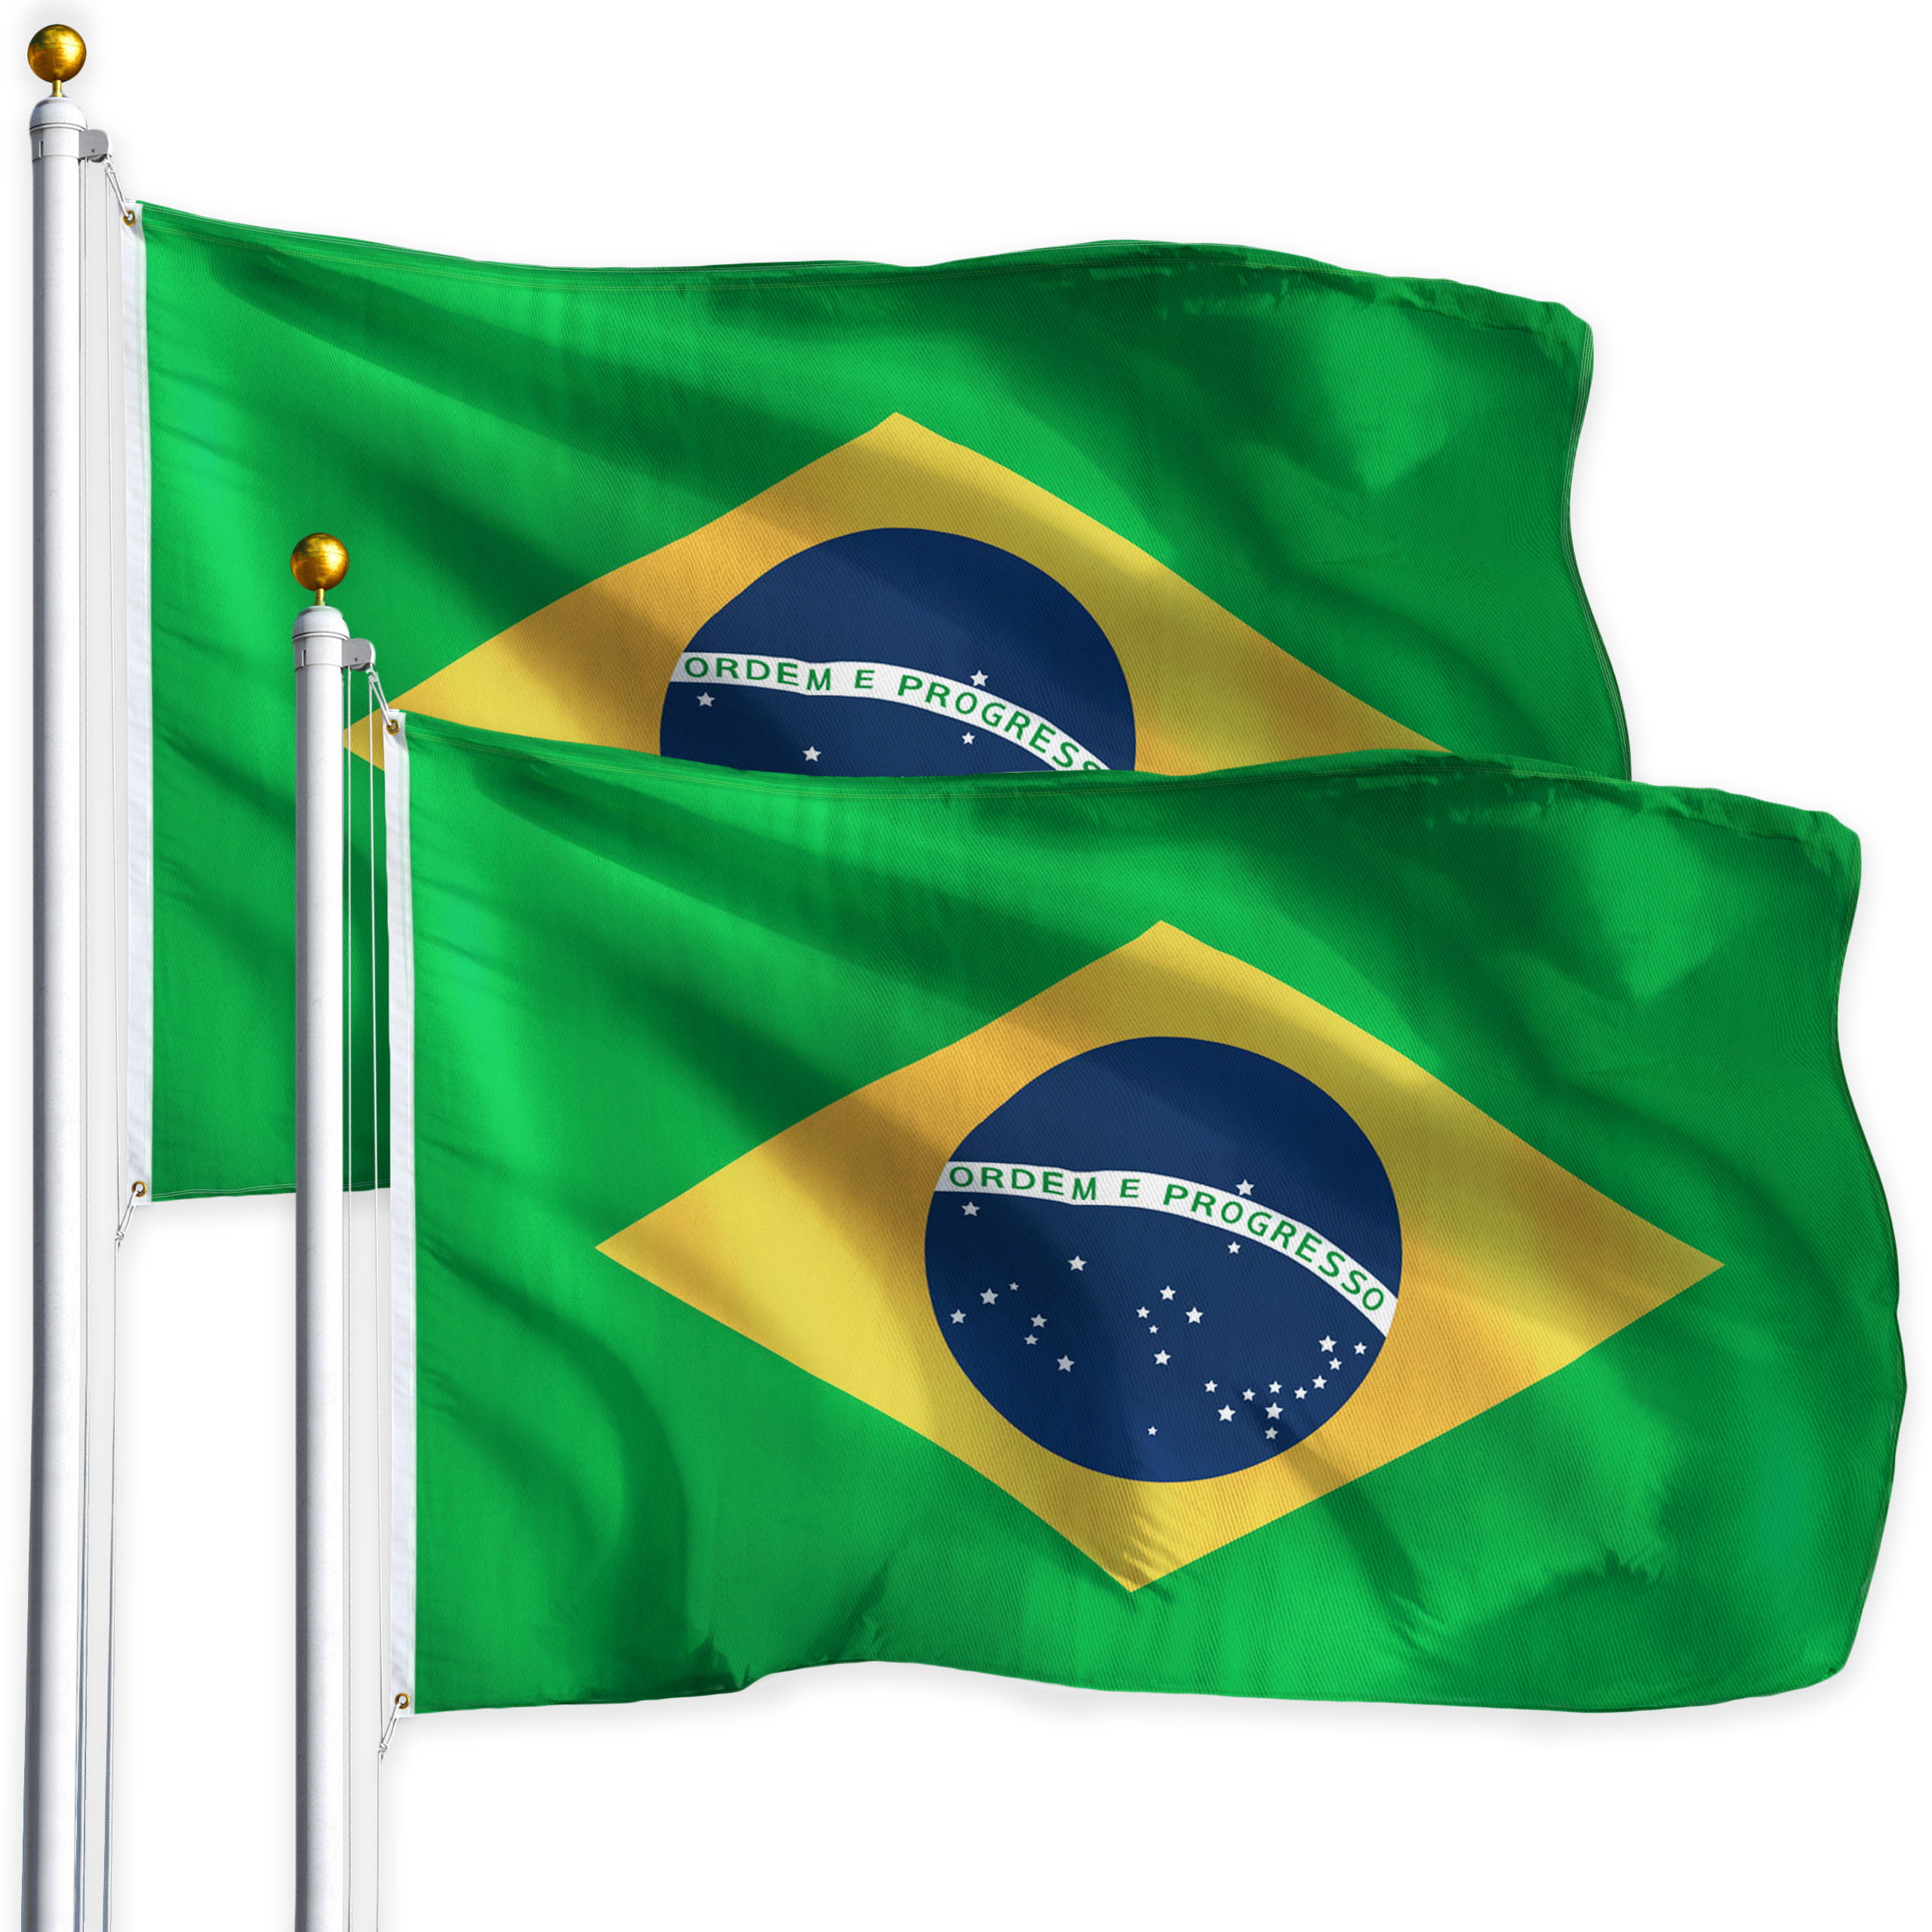 JBCD 2 Pack Brazil Flag 3x5 Foot Outdoor Brazilian Flags Banner with Brass Grommets Durable and UV Fade Resistant 